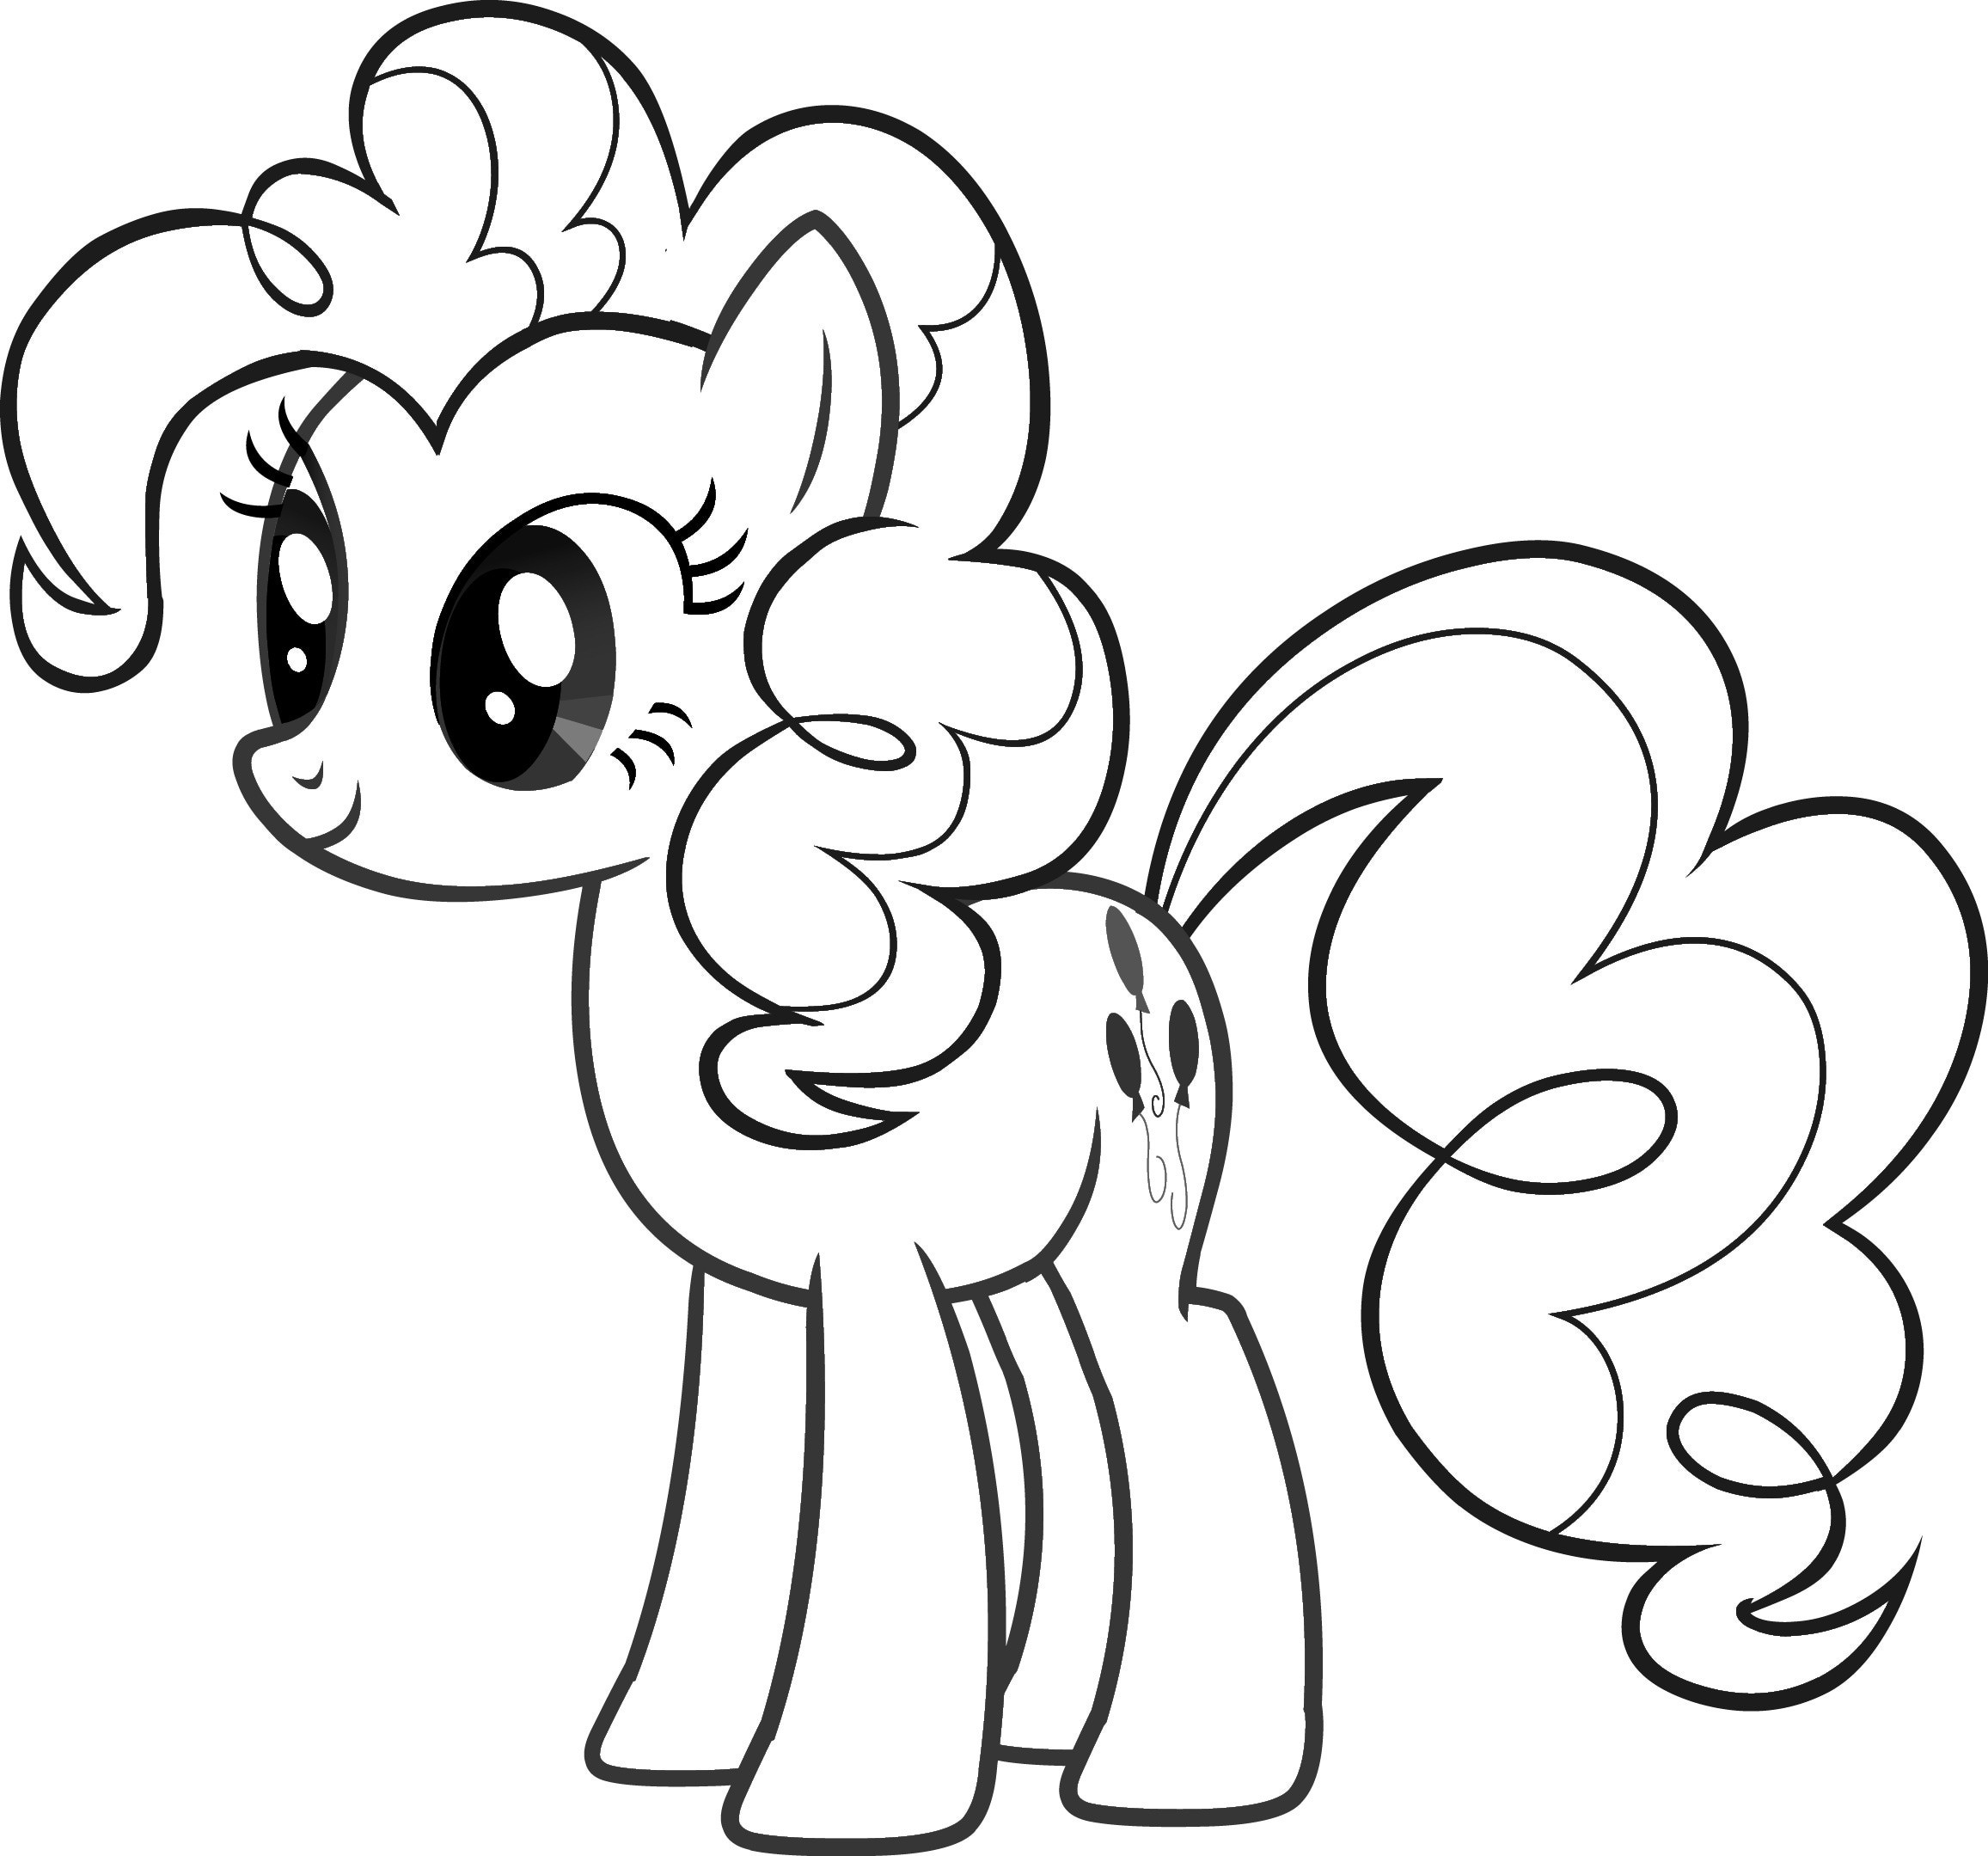 Little Girls Coloring Pages
 My little pony coloring pages